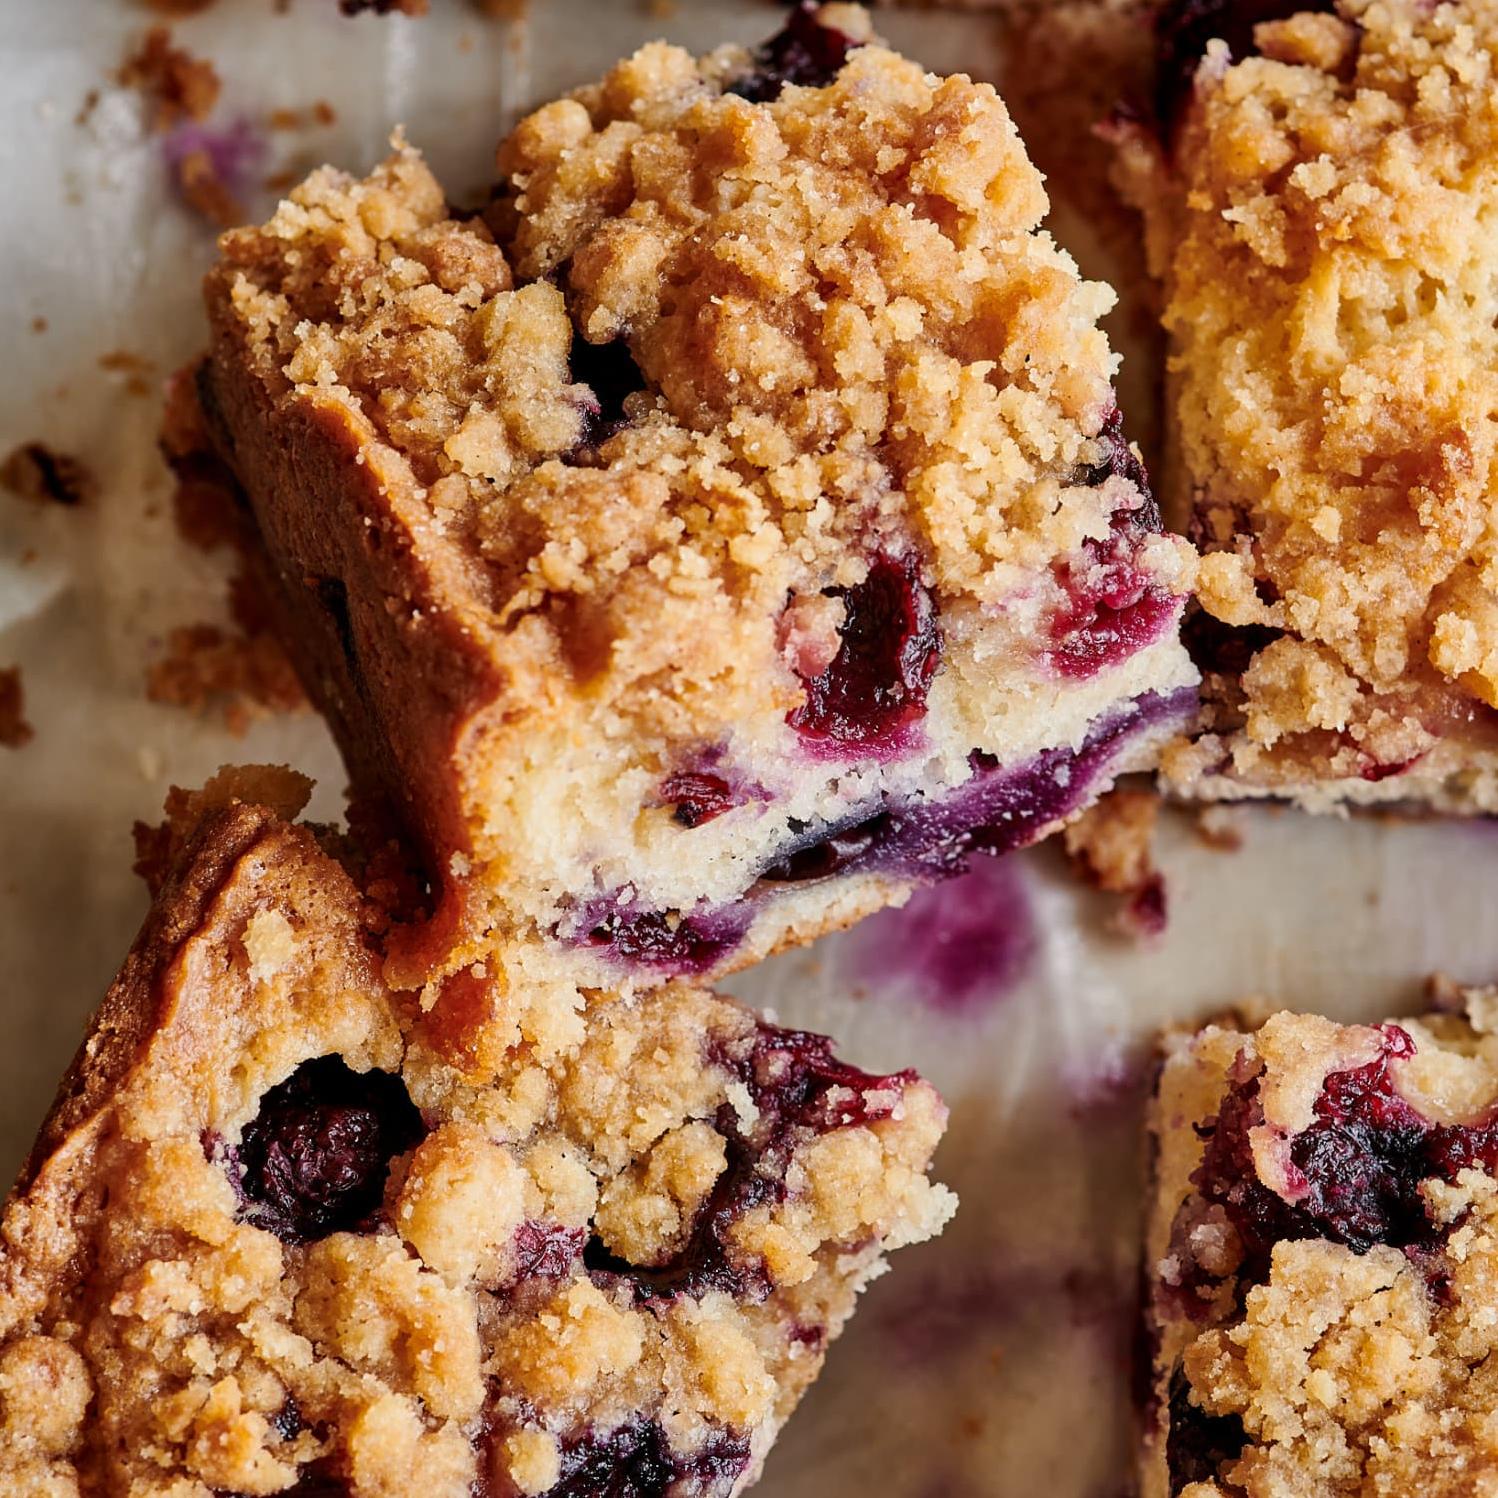  The aroma of freshly baked blueberry coffee cake is unbeatable.